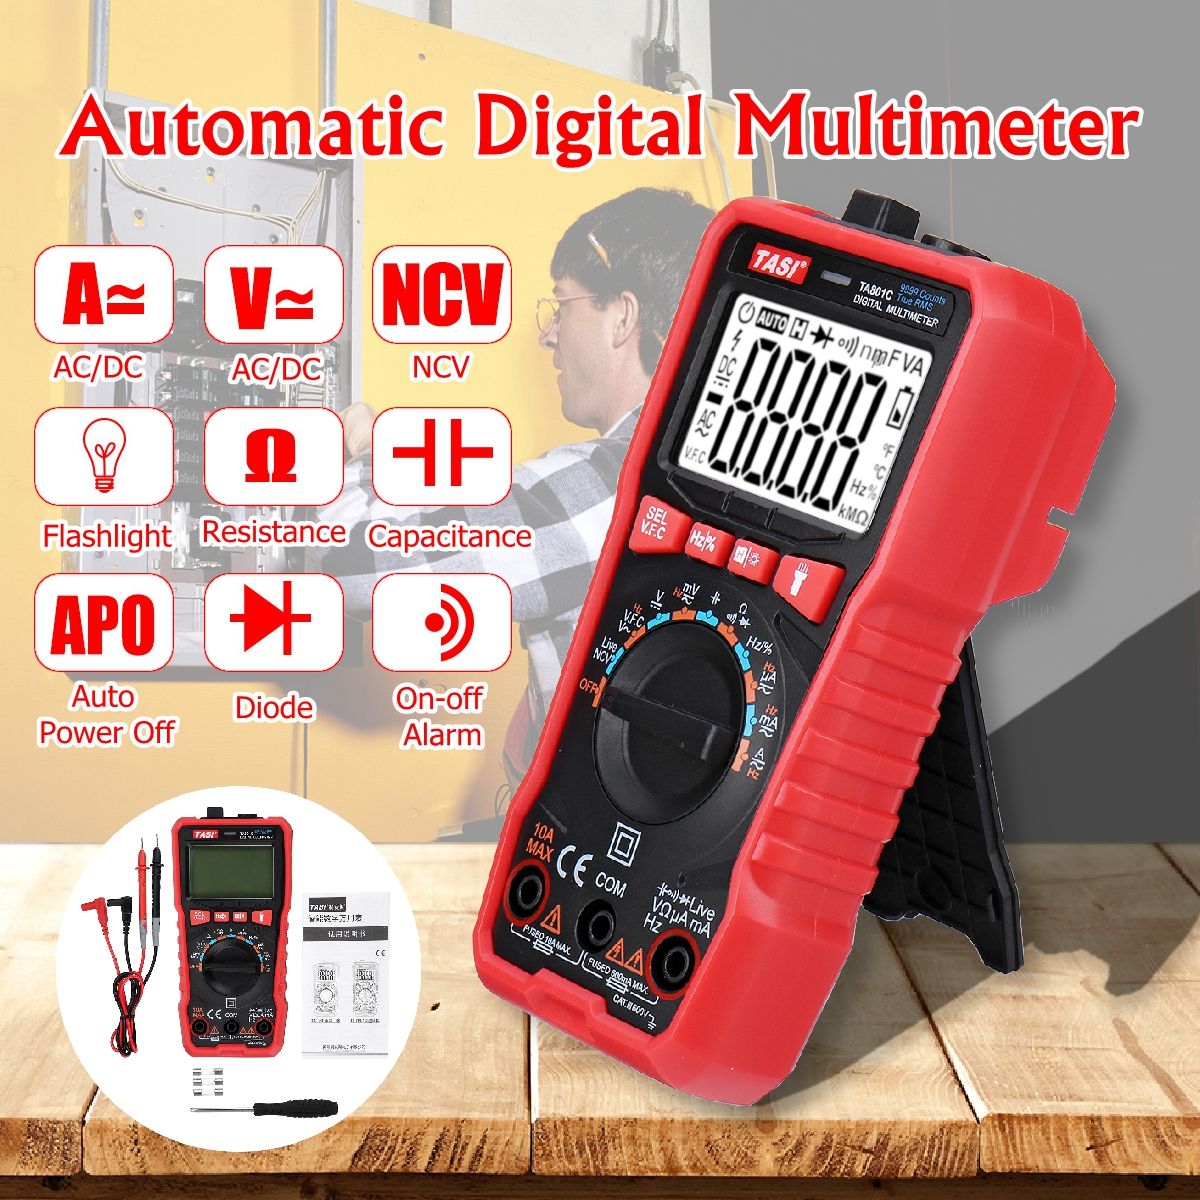 TA801C-Multimeter-High-Precision-Automatic-Digital-Ammeter-Table--AC-and-DC-Universal-Multifunction-1530116